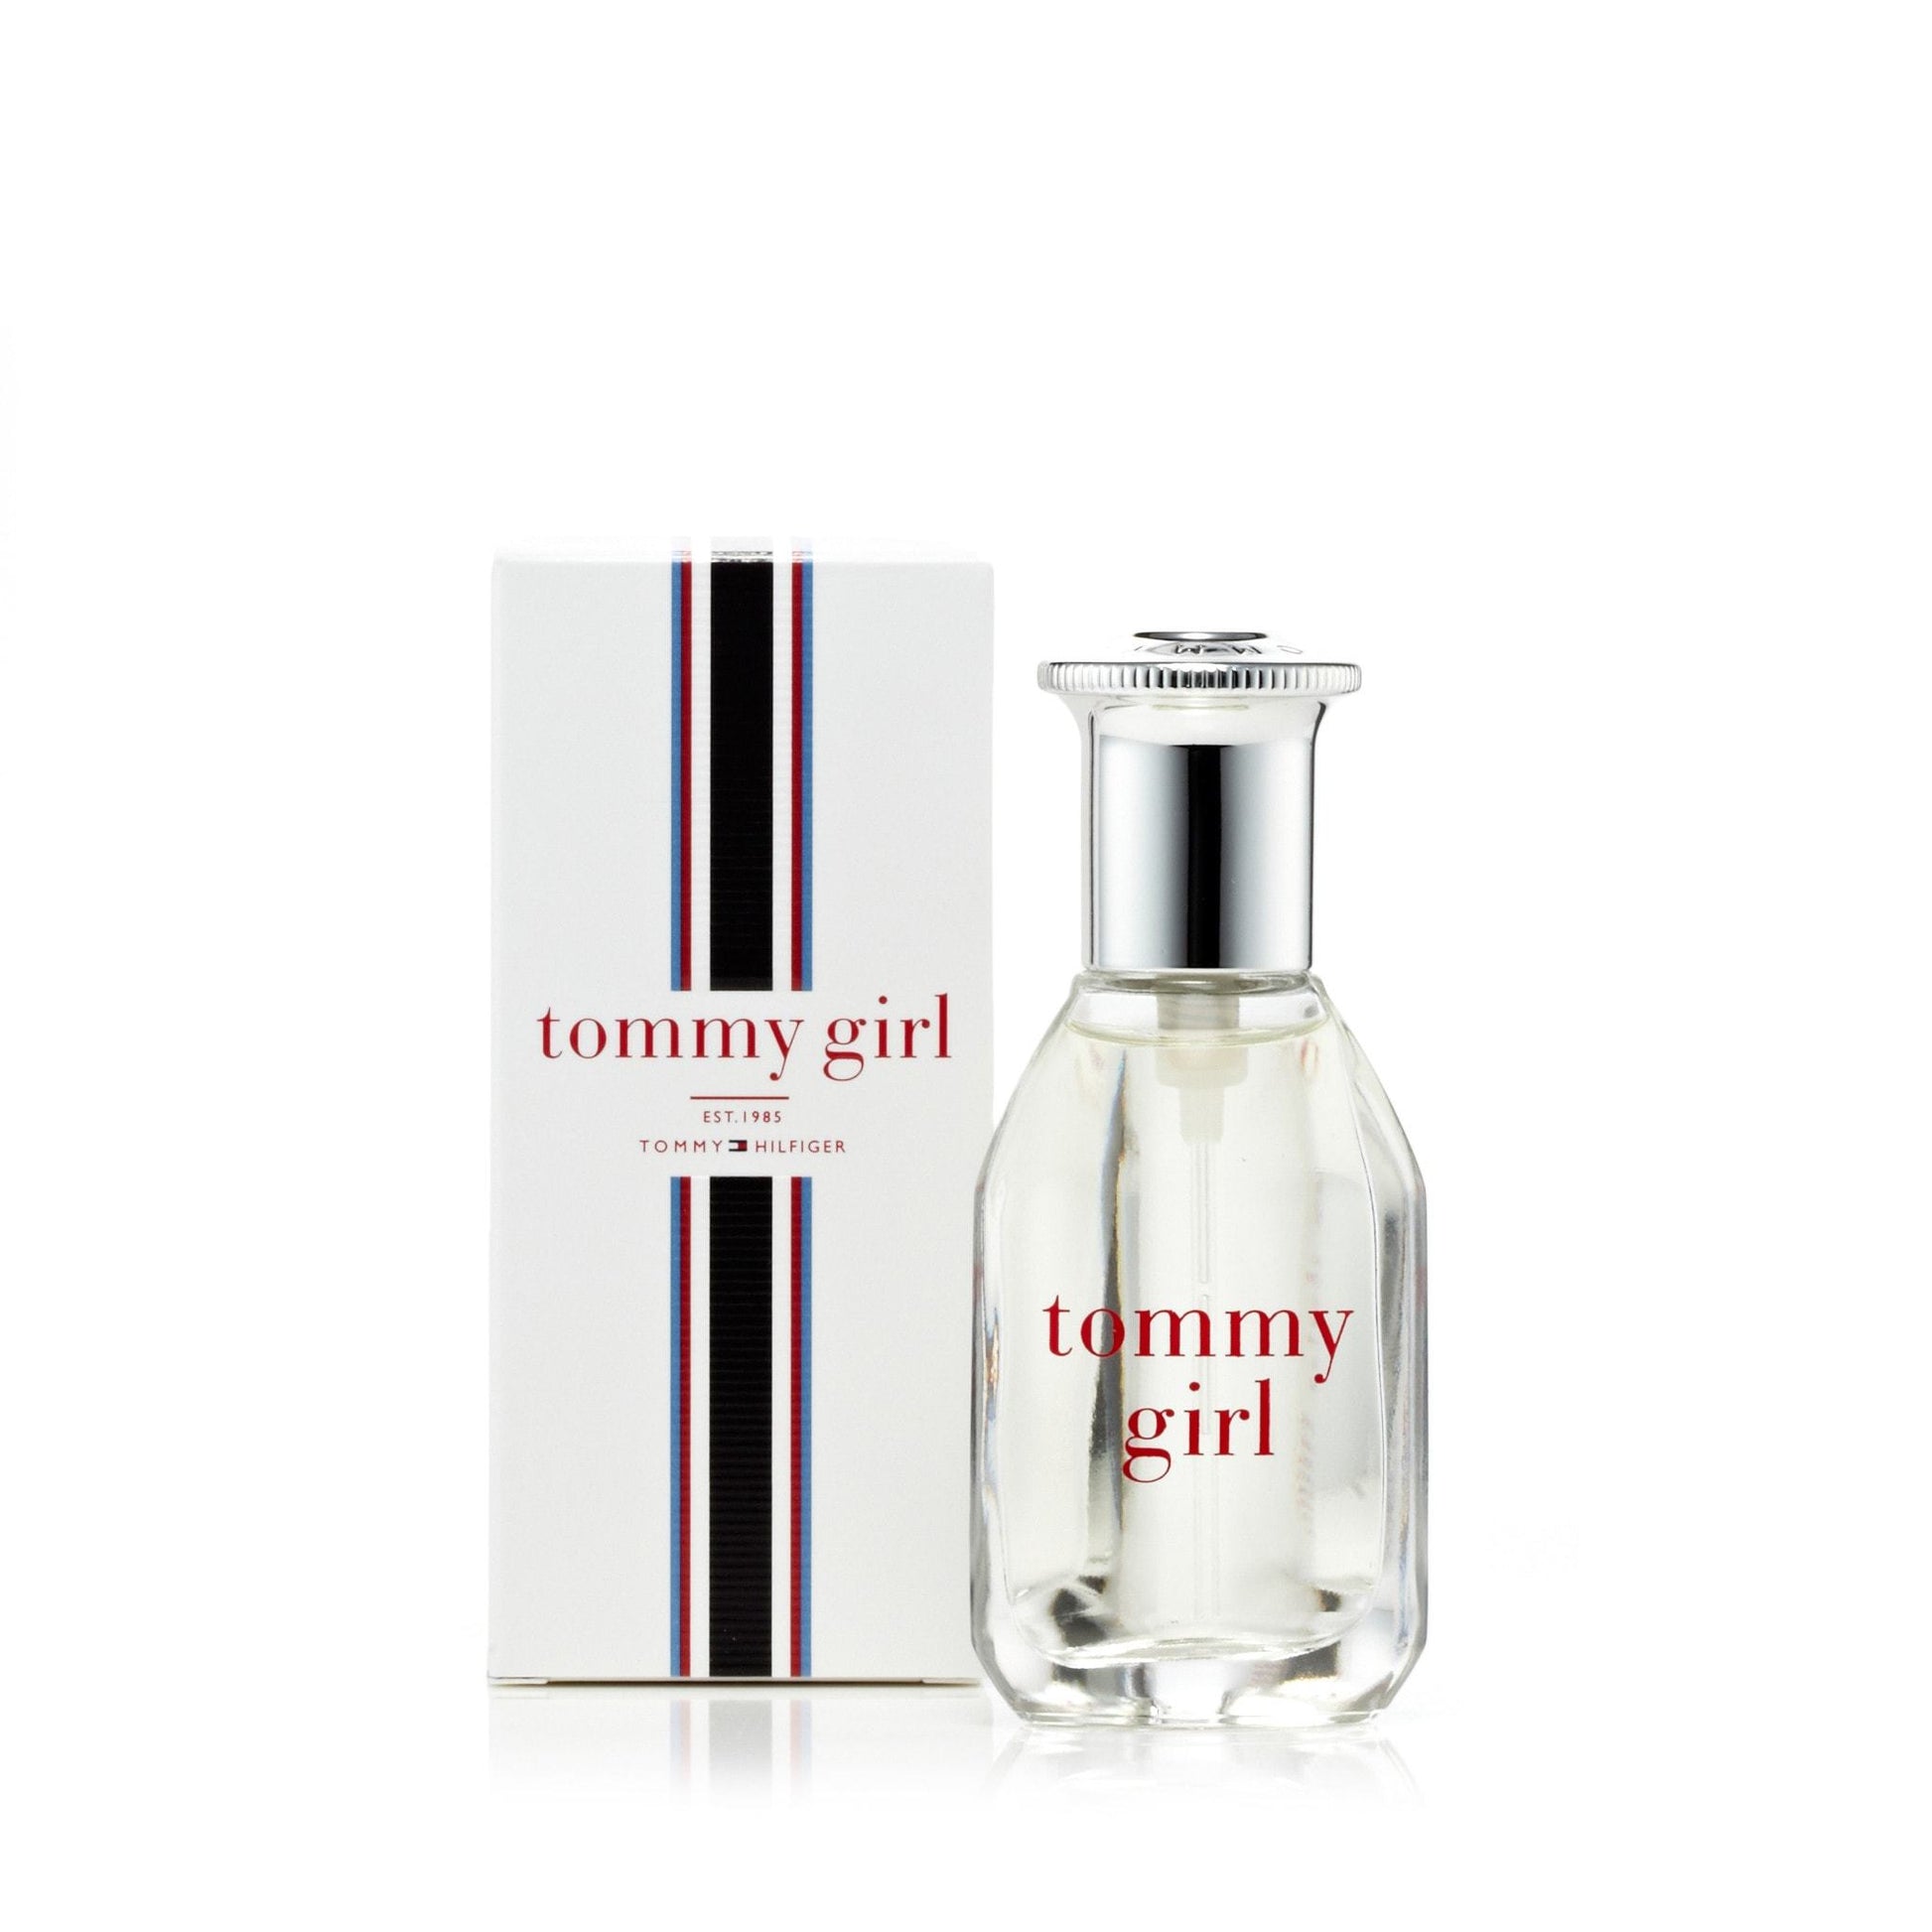 Tommy Girl Eau de Toilette Spray for Women by Tommy Hilfiger, Product image 4